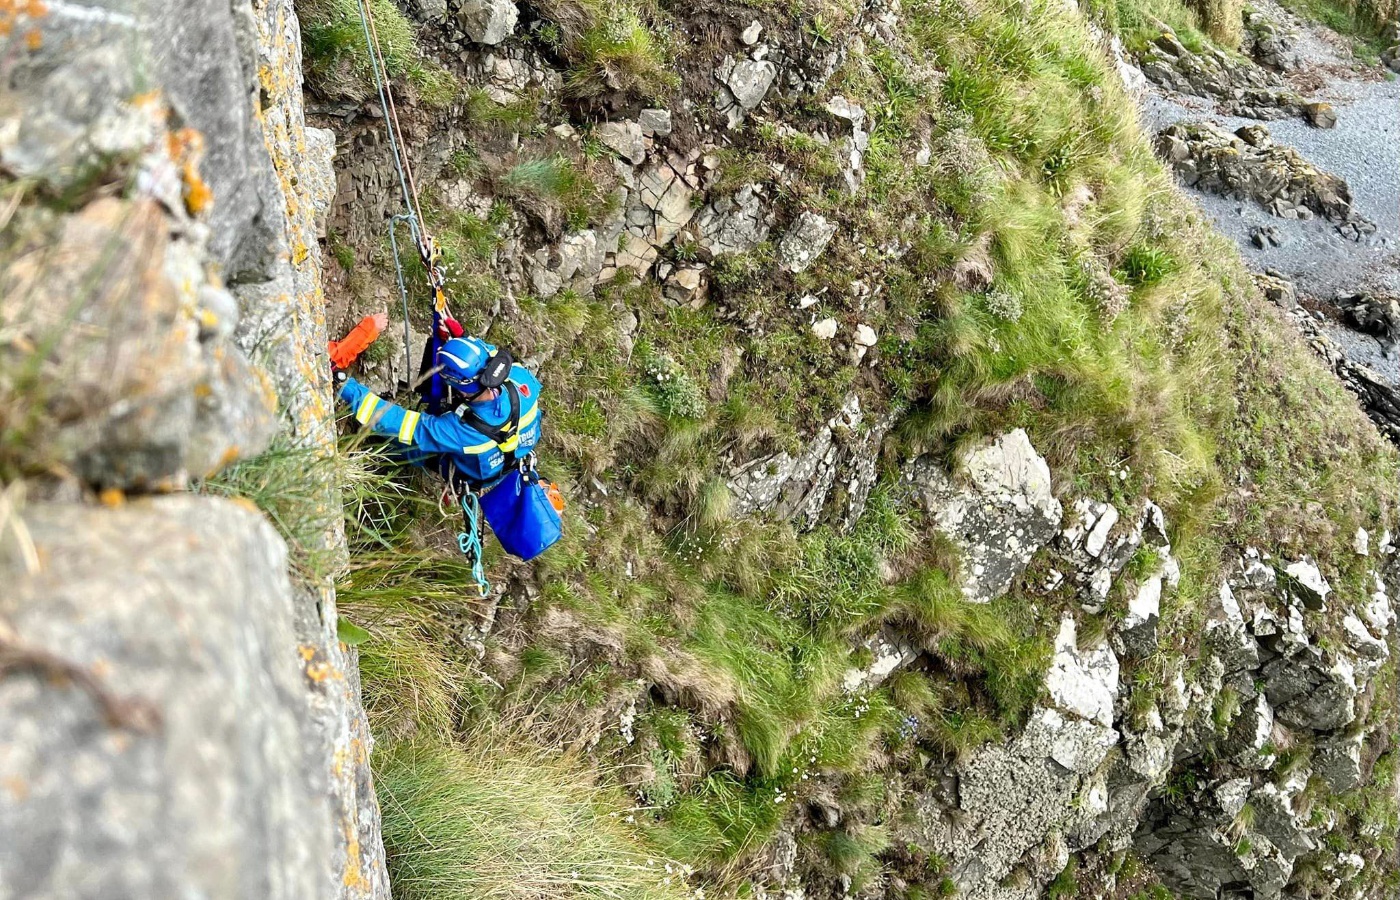 Two people had gone over the cliff to rescue the dog when one man became stuck prompting the rescue operation.